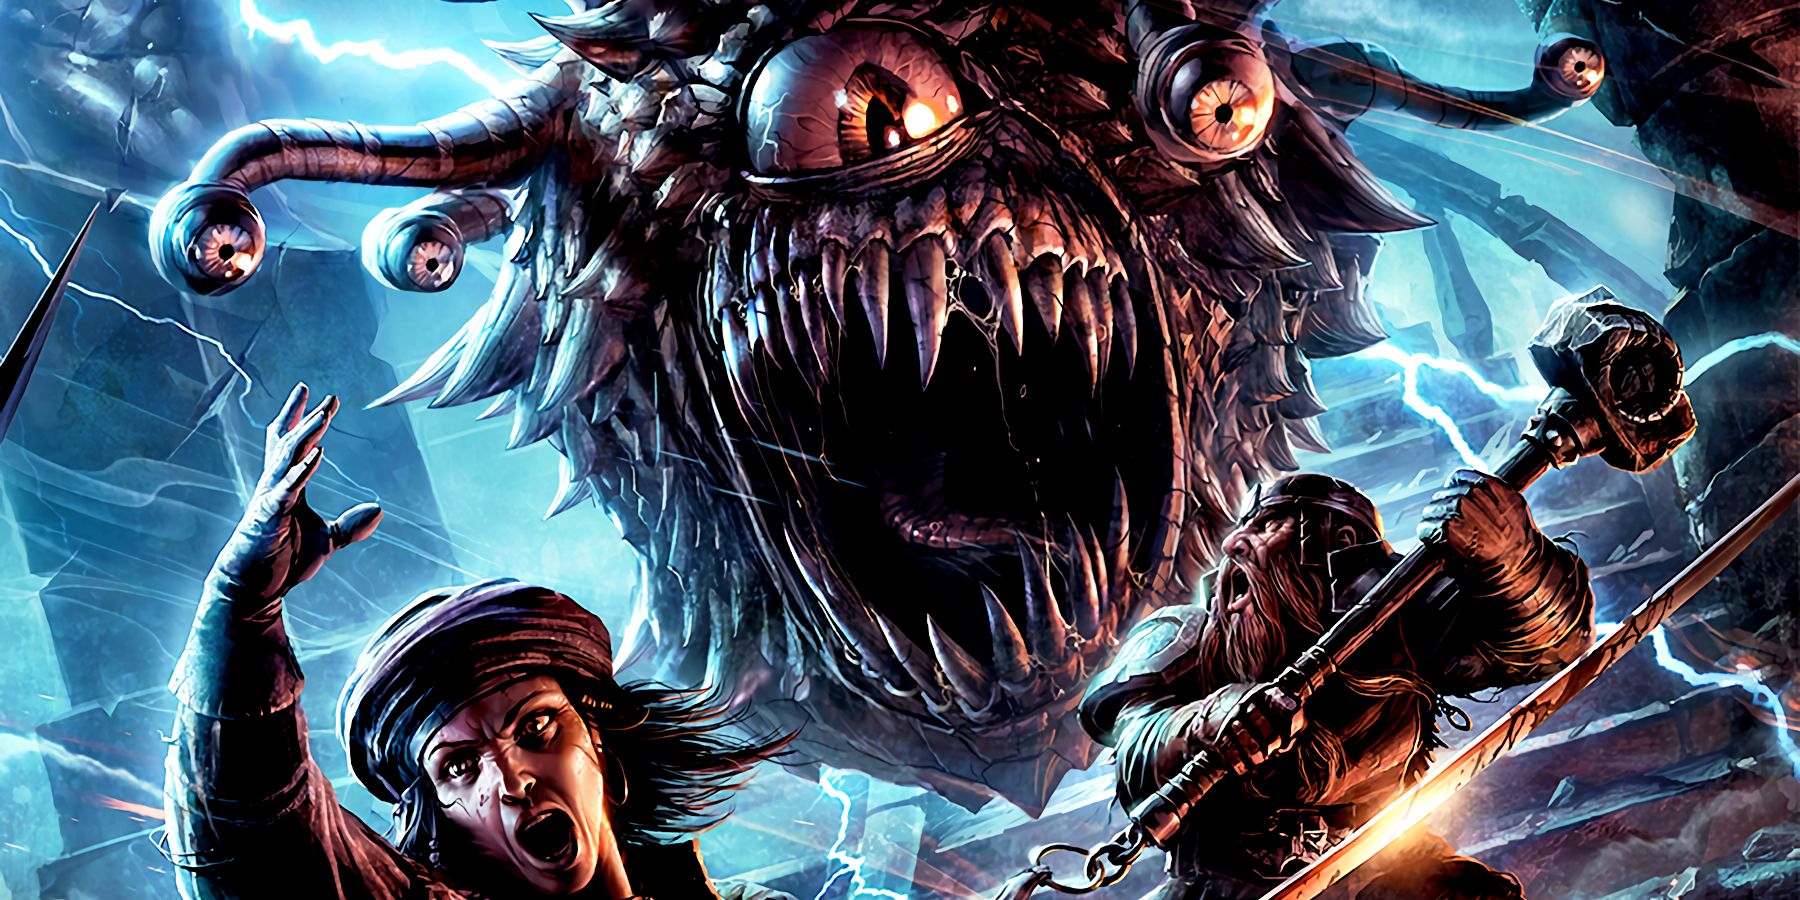 Cropped image of the cover art for the upcoming Dungeons & Dragons Monster Manual, showing a beholder attacking two characters in a thunderstorm.